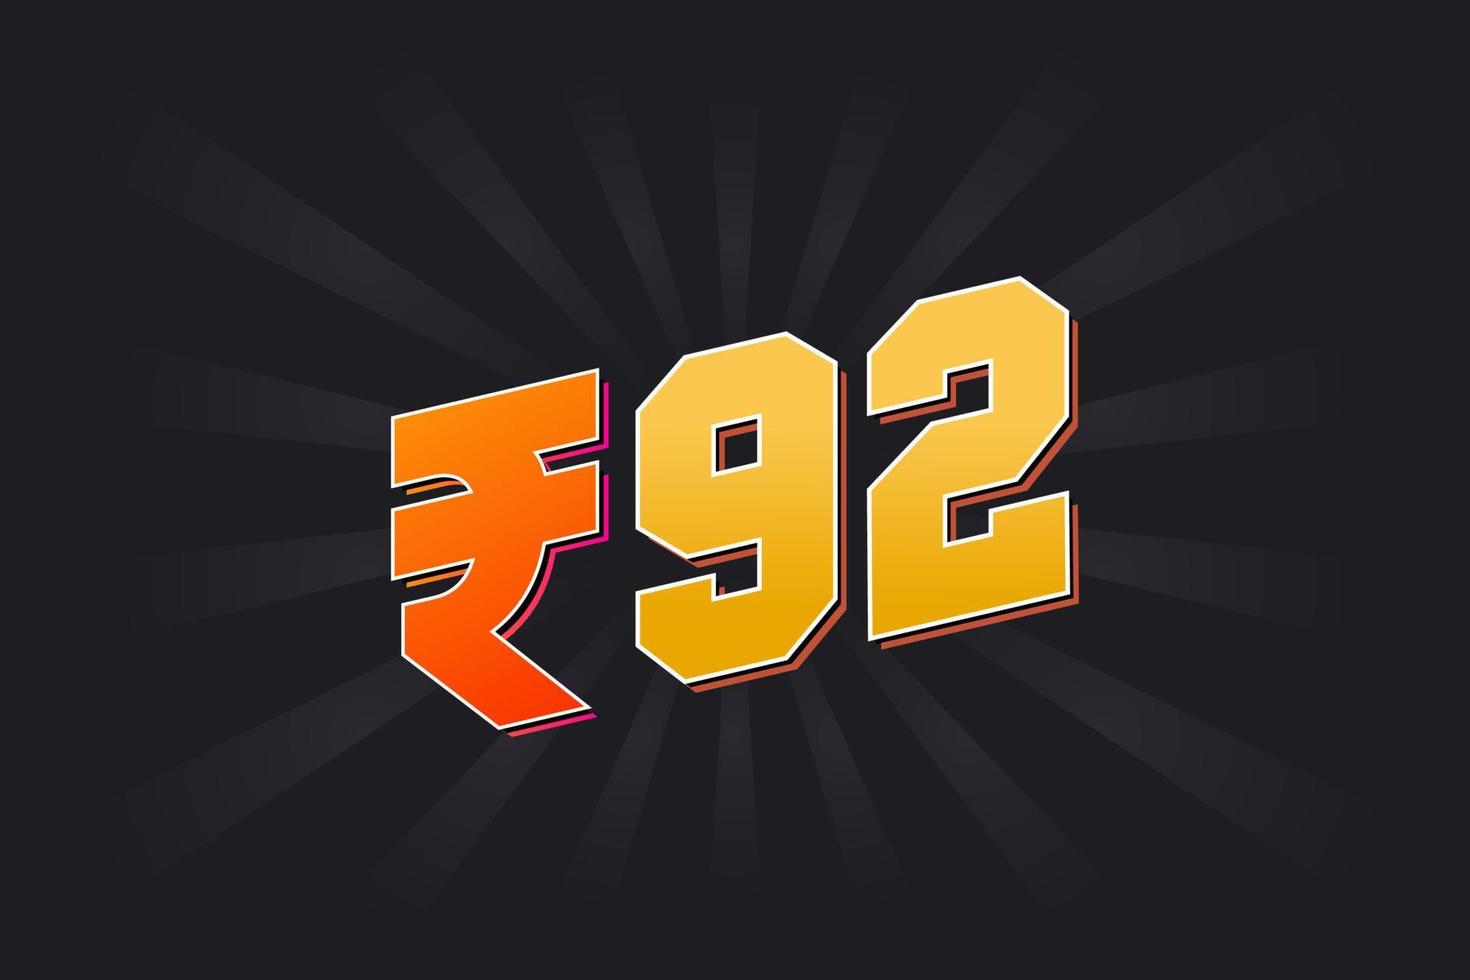 92 Indian Rupee vector currency image. 92 Rupee symbol bold text vector illustration